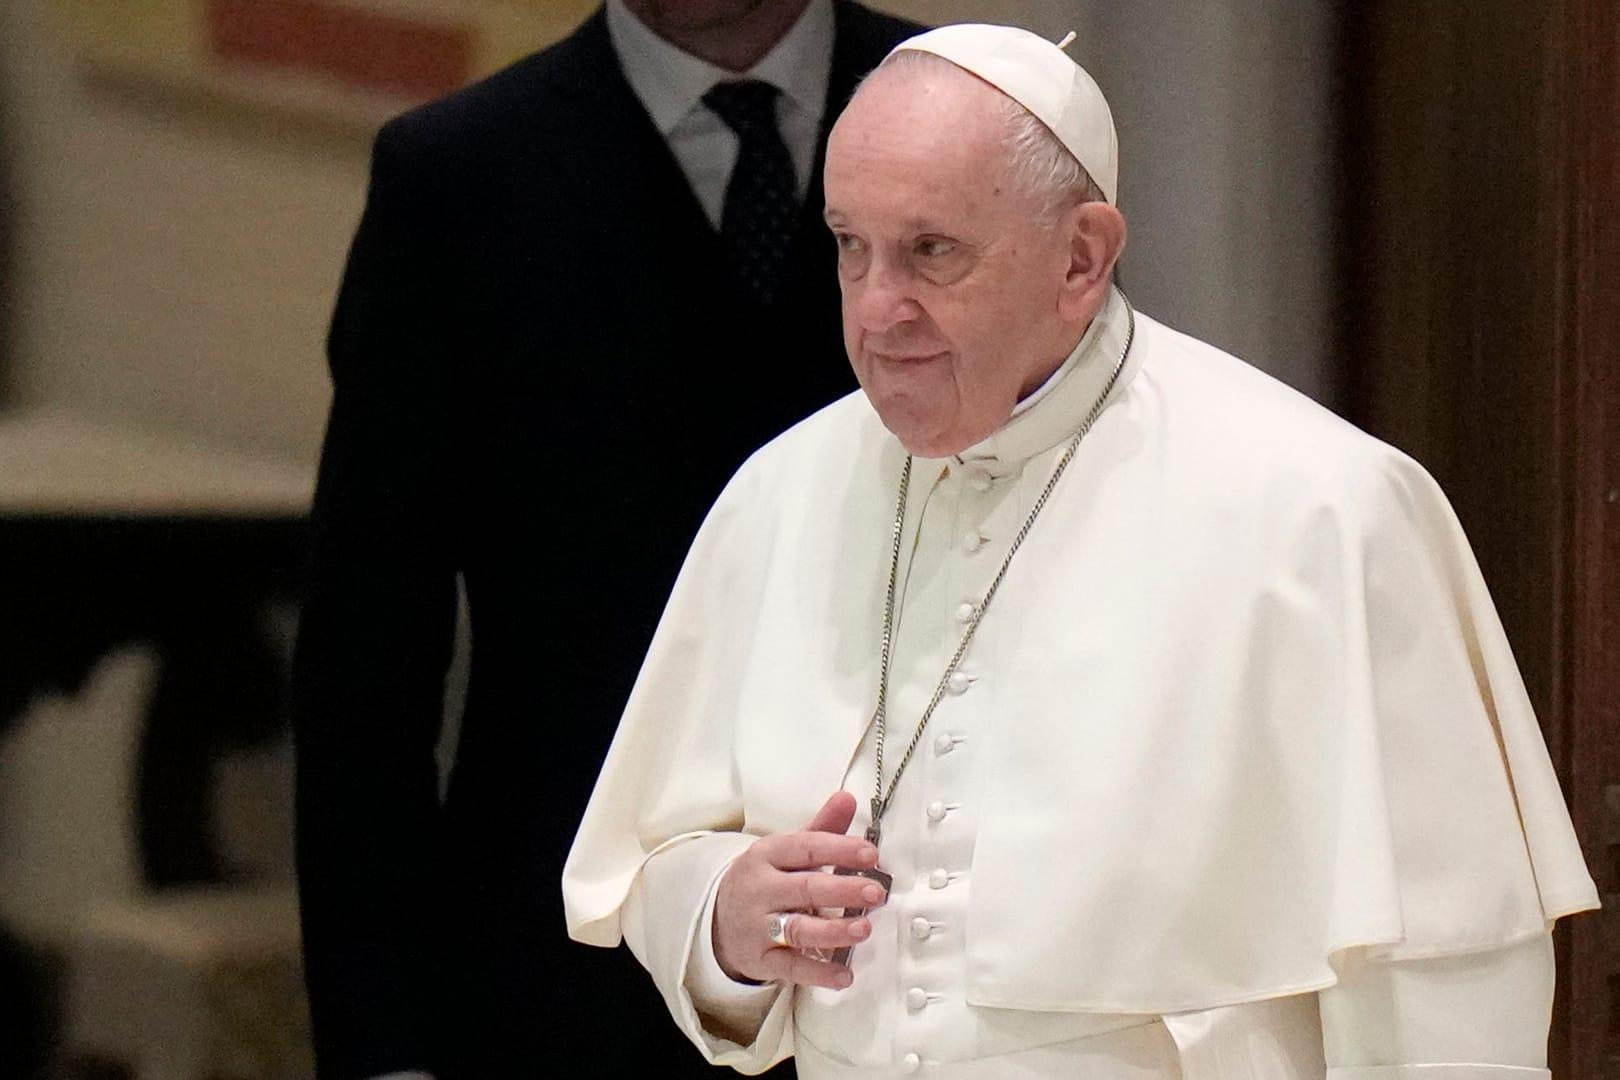 Malta general elections could overshadow papal visit